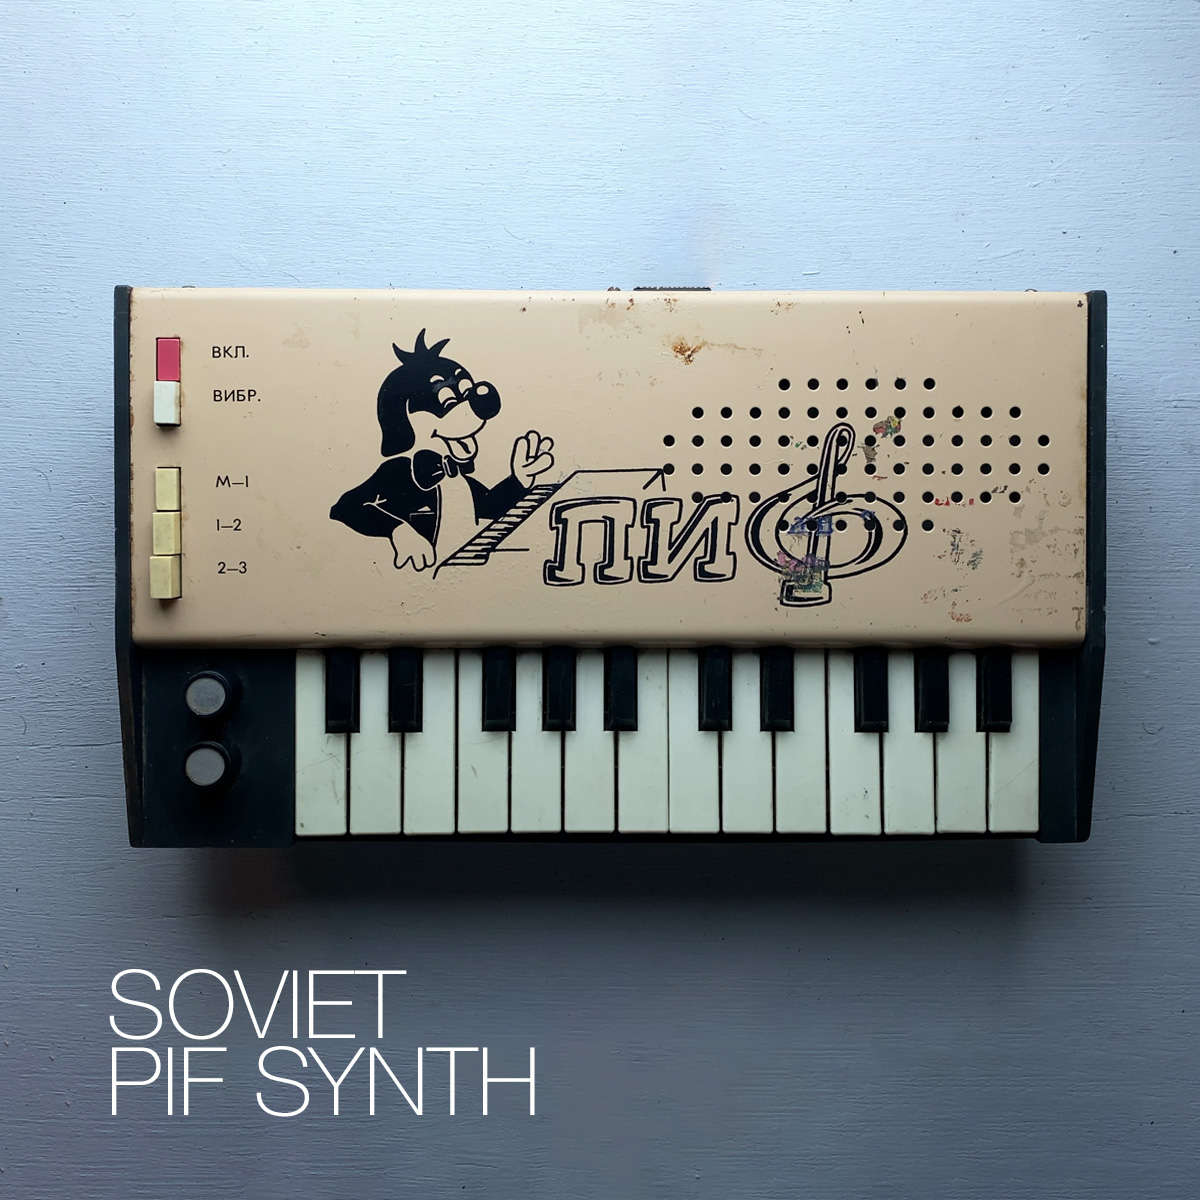 Soviet PIF Synth: A Cute Analog Synthesizer for Children